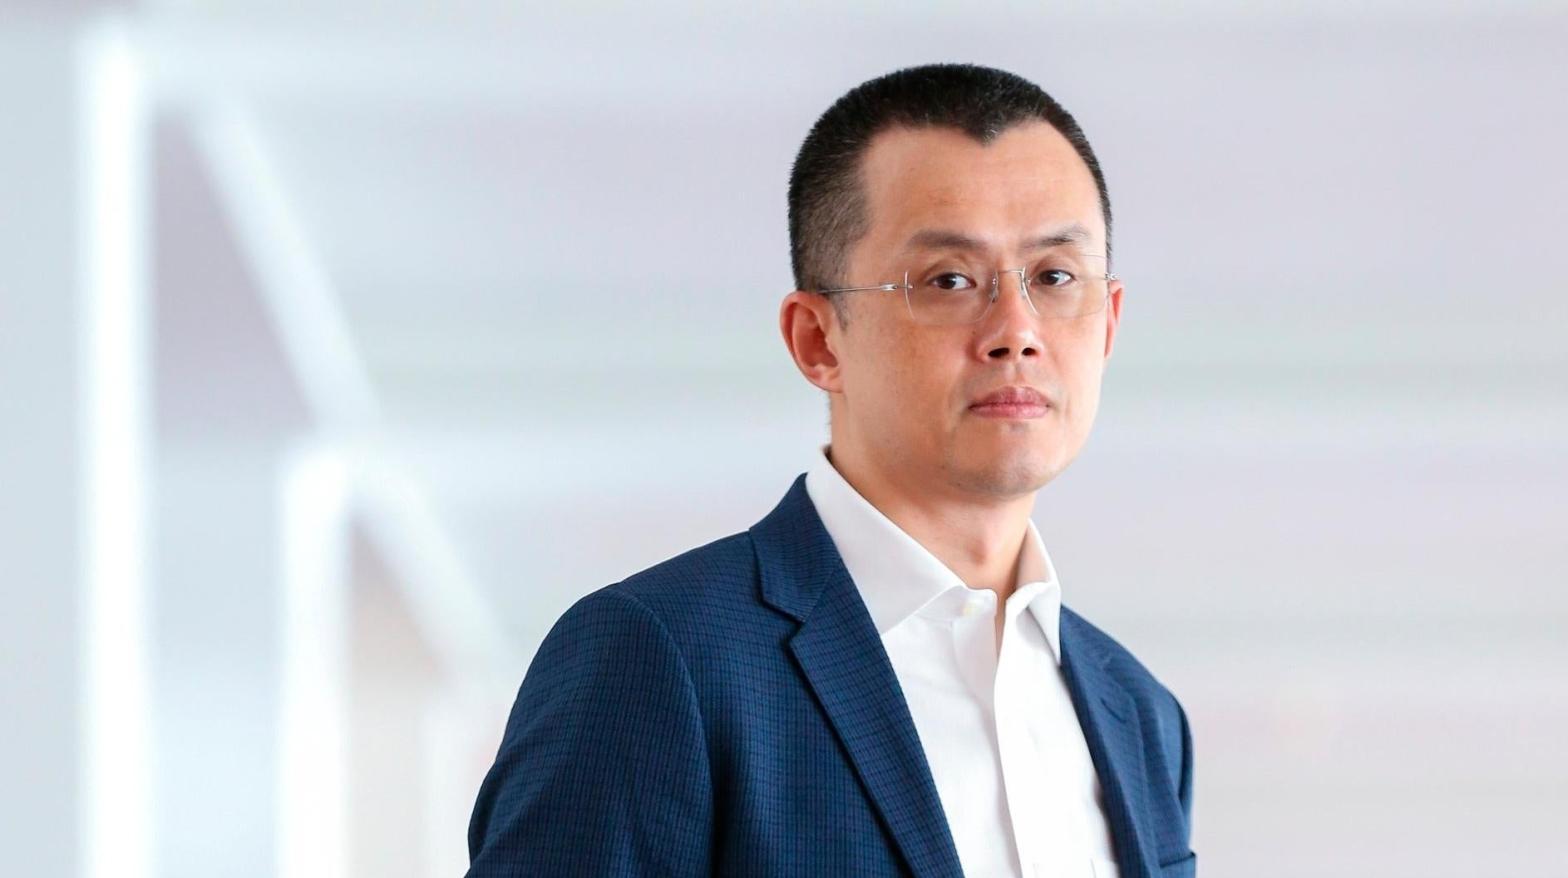 Binance CEO Changpeng Zhao has repeatedly tried to calm investors' and customers' concerns over the state of his exchange, though recent reports show a massive number of holders are withdrawing their crypto from the platform. (Photo: Singapore Press, AP)